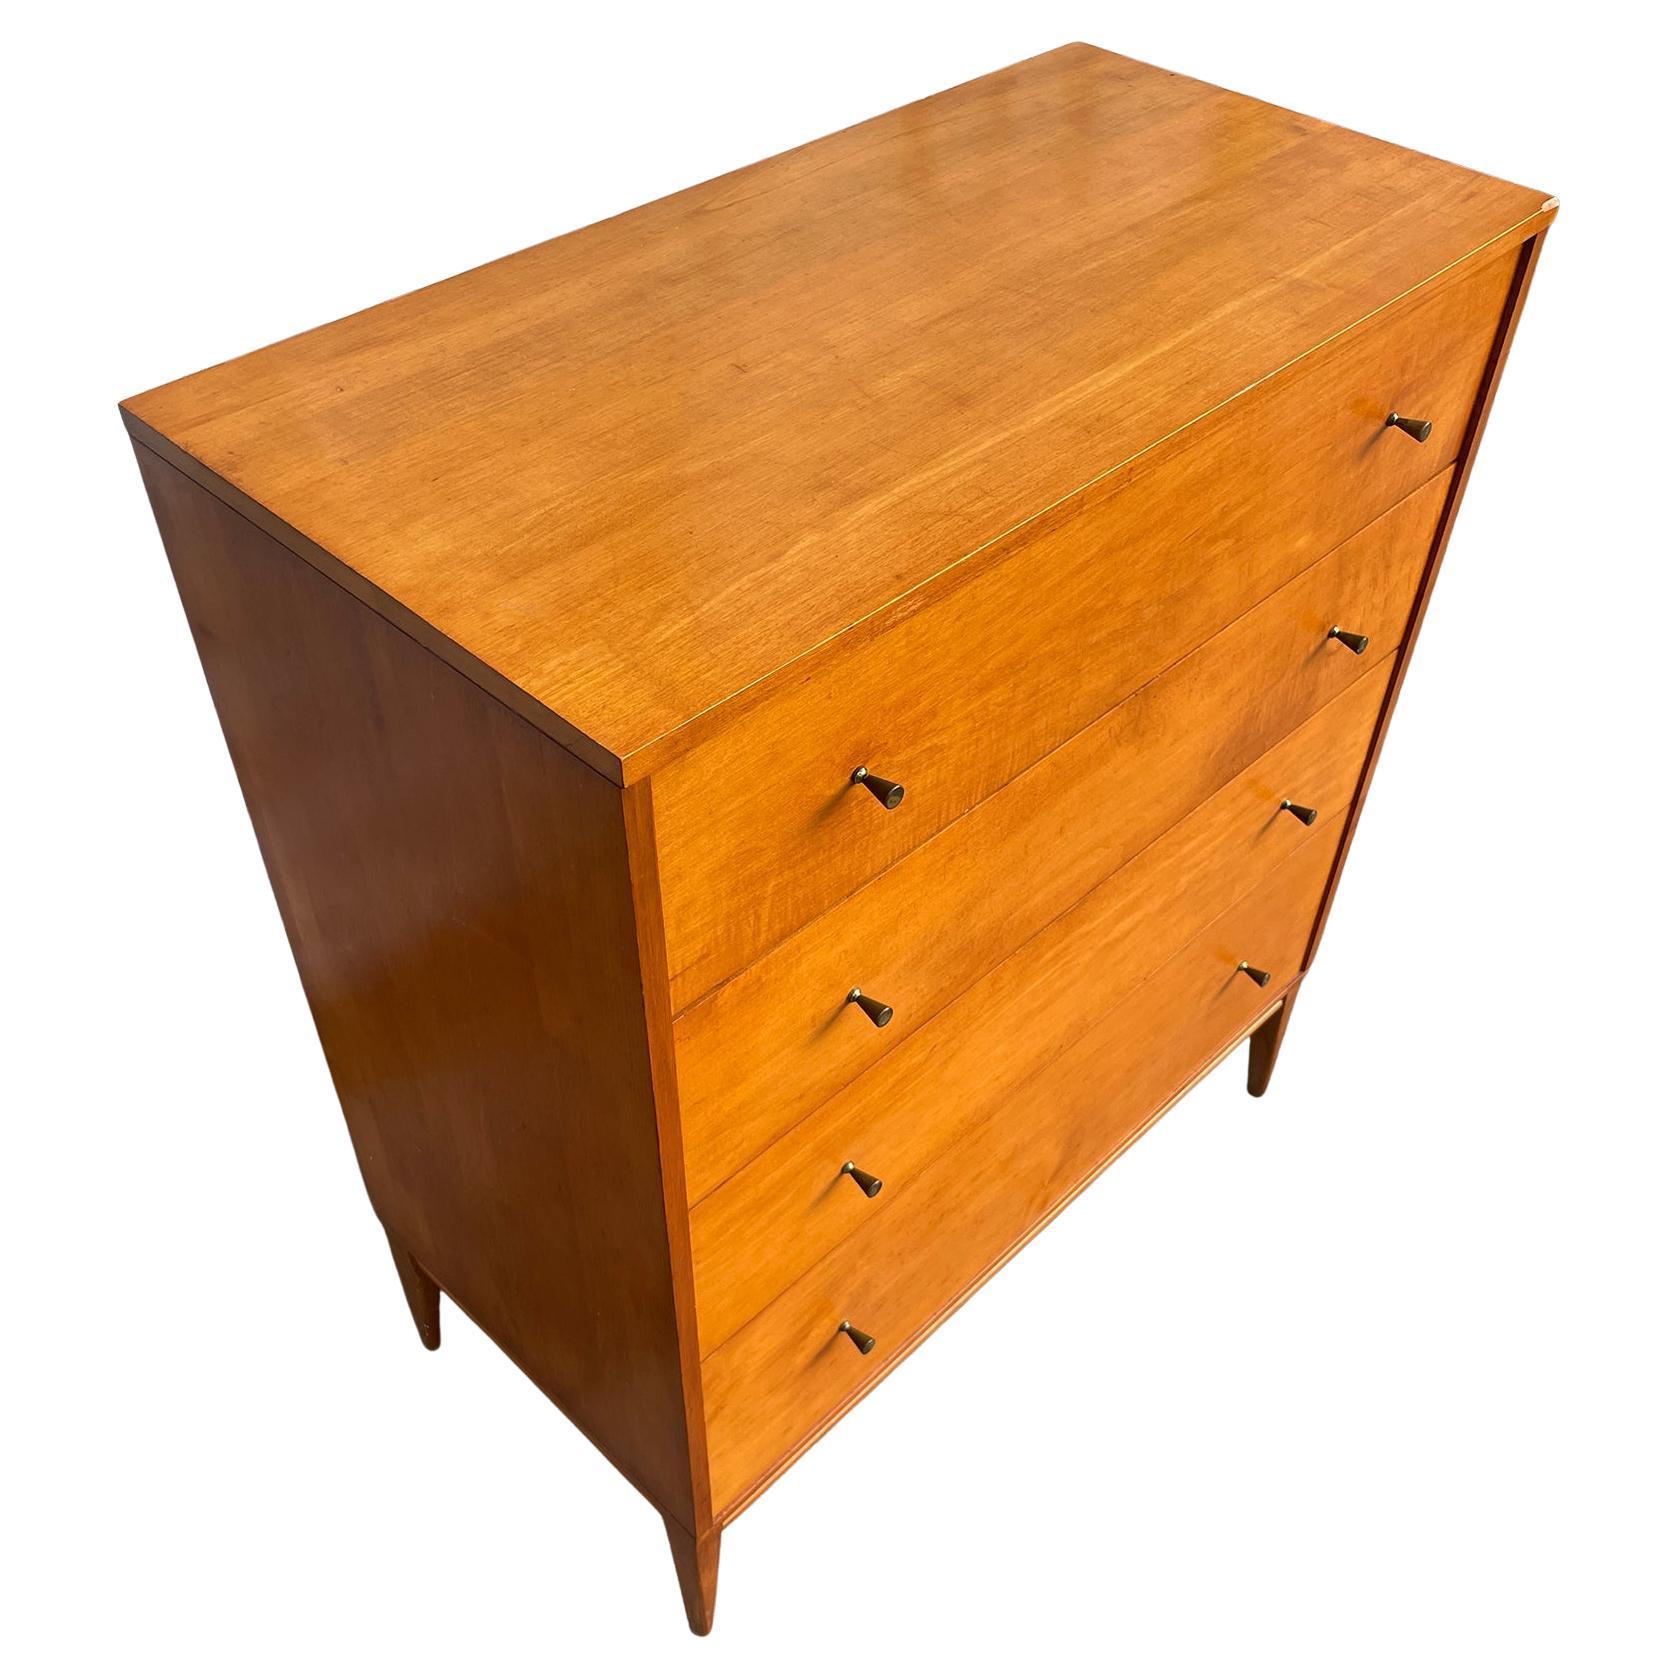 Beautiful Mid century tall 4-drawer dresser by Paul McCobb circa 1950 Planner Group #1501 with 4 center drawers. Solid maple construction has a beautiful Medium Blonde original Finish. All original brass cone pulls polished. Sits on 4 solid maple